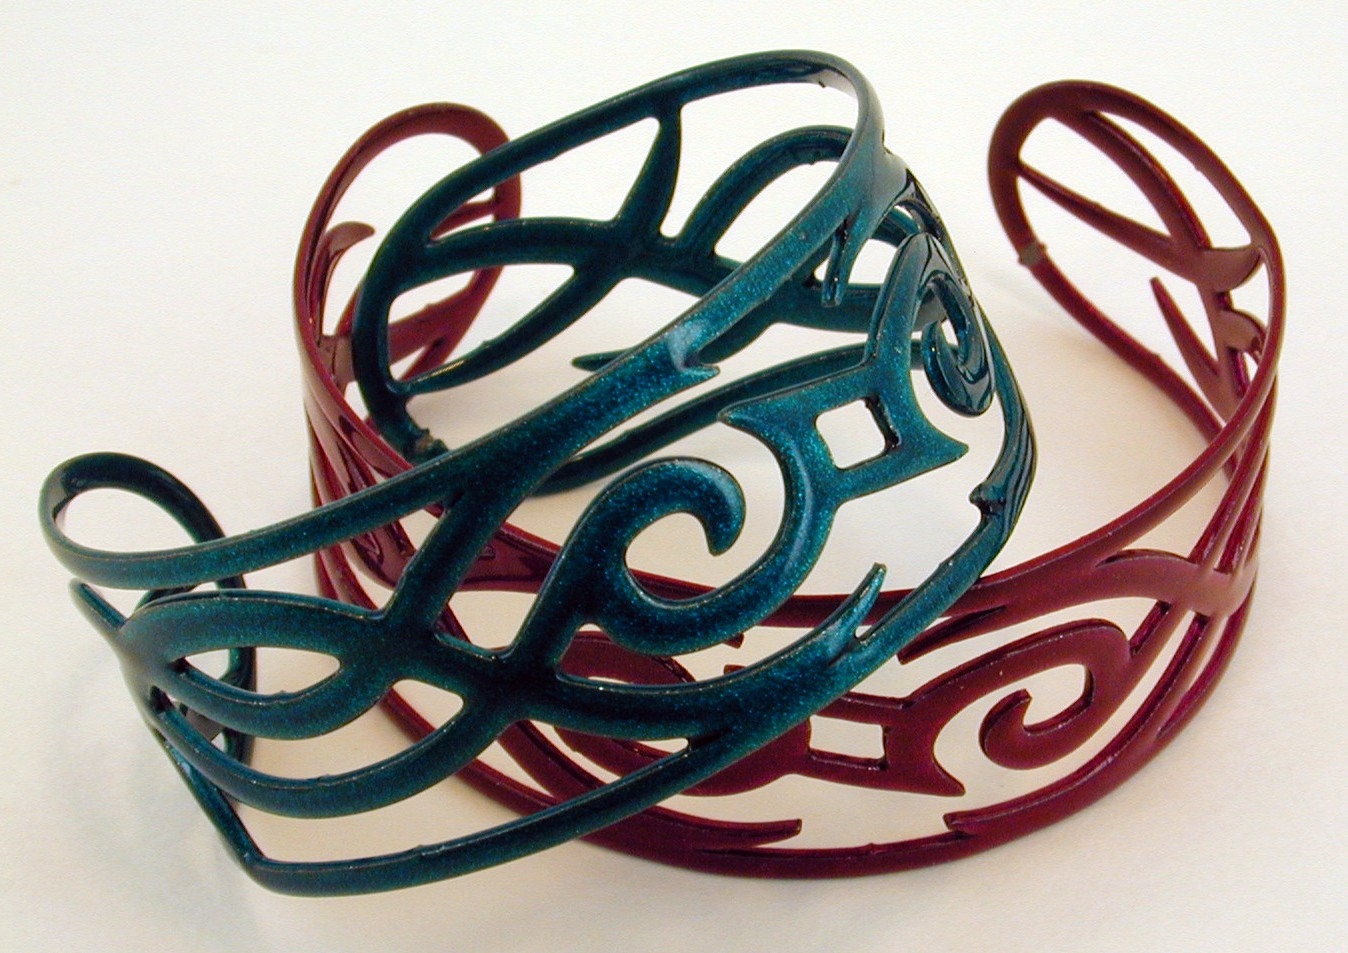 Krome Brand Bangles by Paul Michael Design at CustomMade.com